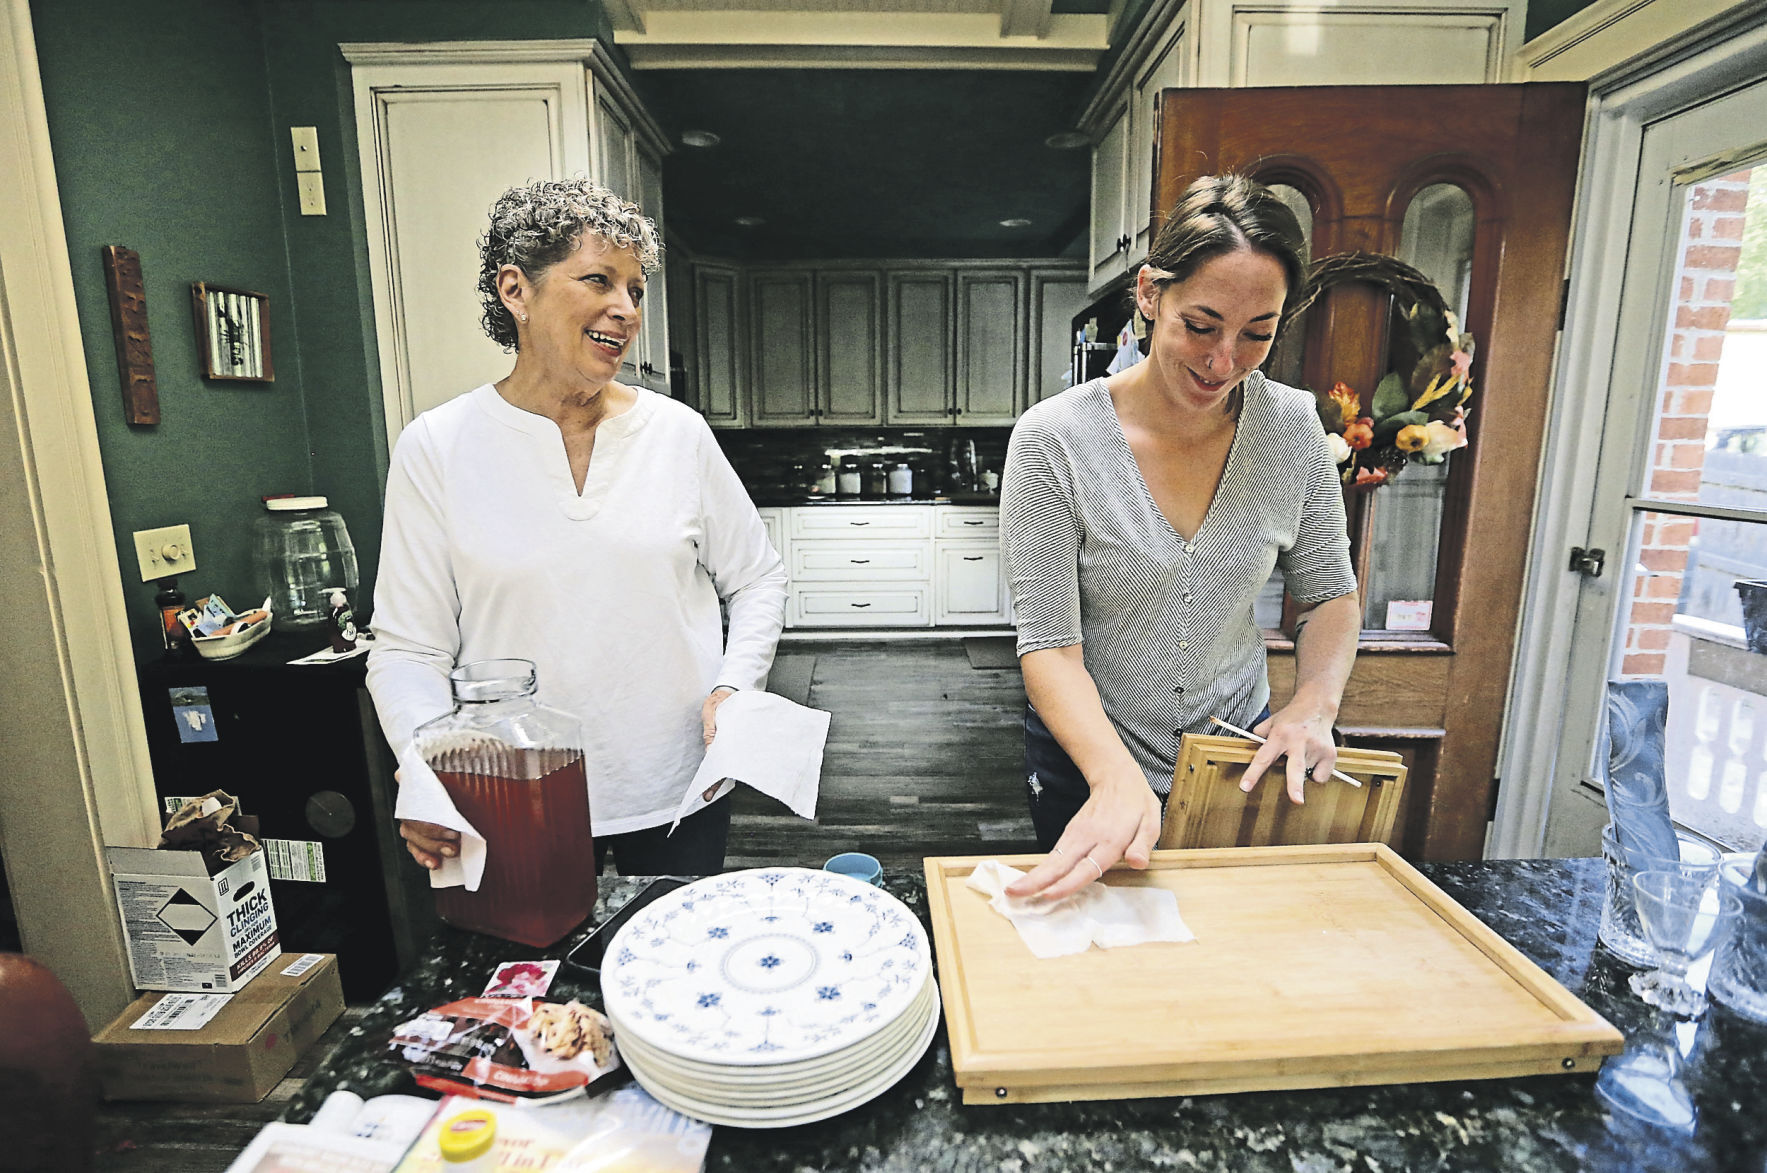 Owner Carol Gebelt (left) talks with her daughter Katie Burcham while preparing breakfast for guests at The Steamboat House Bed and Breakfast in Galena, Ill.    PHOTO CREDIT: JESSICA REILLY